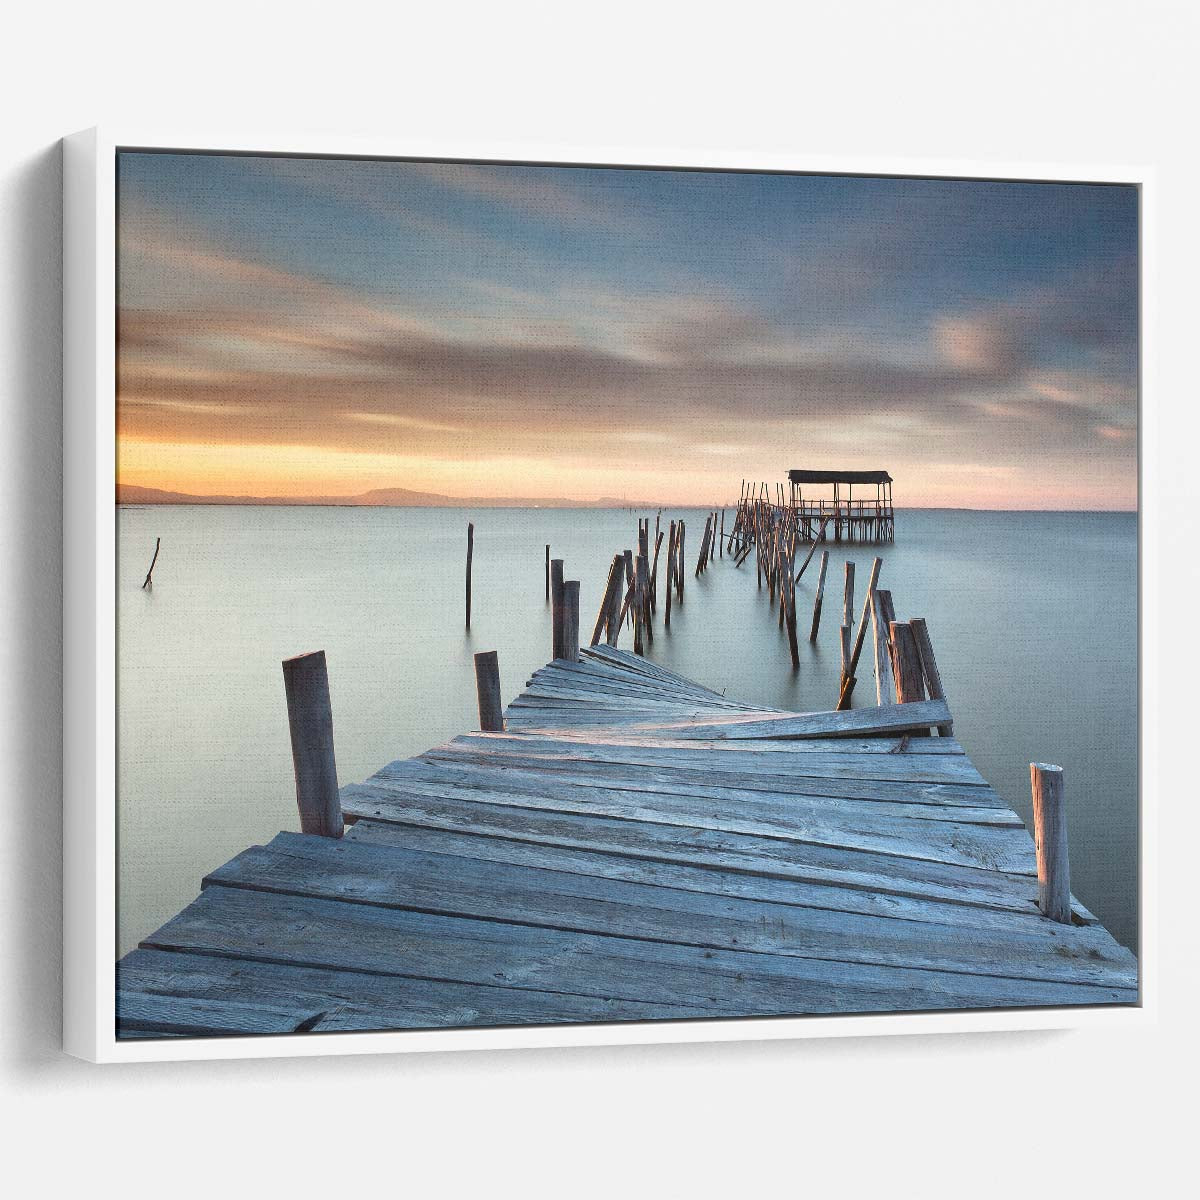 Decaying Pier Sunset Seascape Portugal Wall Art by Luxuriance Designs. Made in USA.